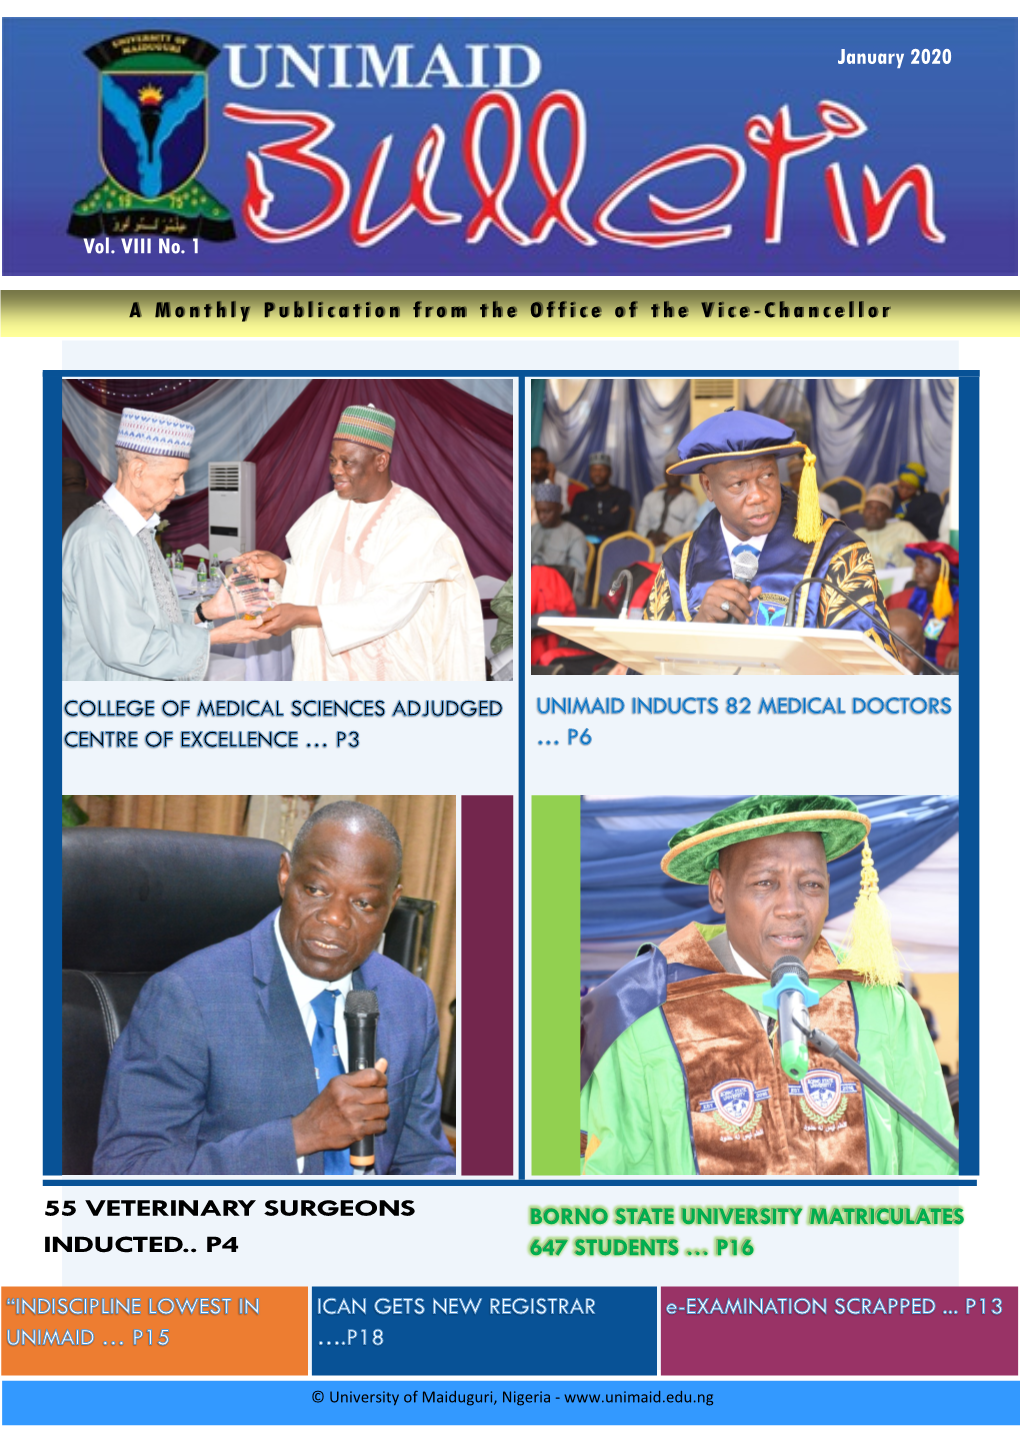 A Monthly Publication from the Office of the Vice-Chancellor Vol. VIII No